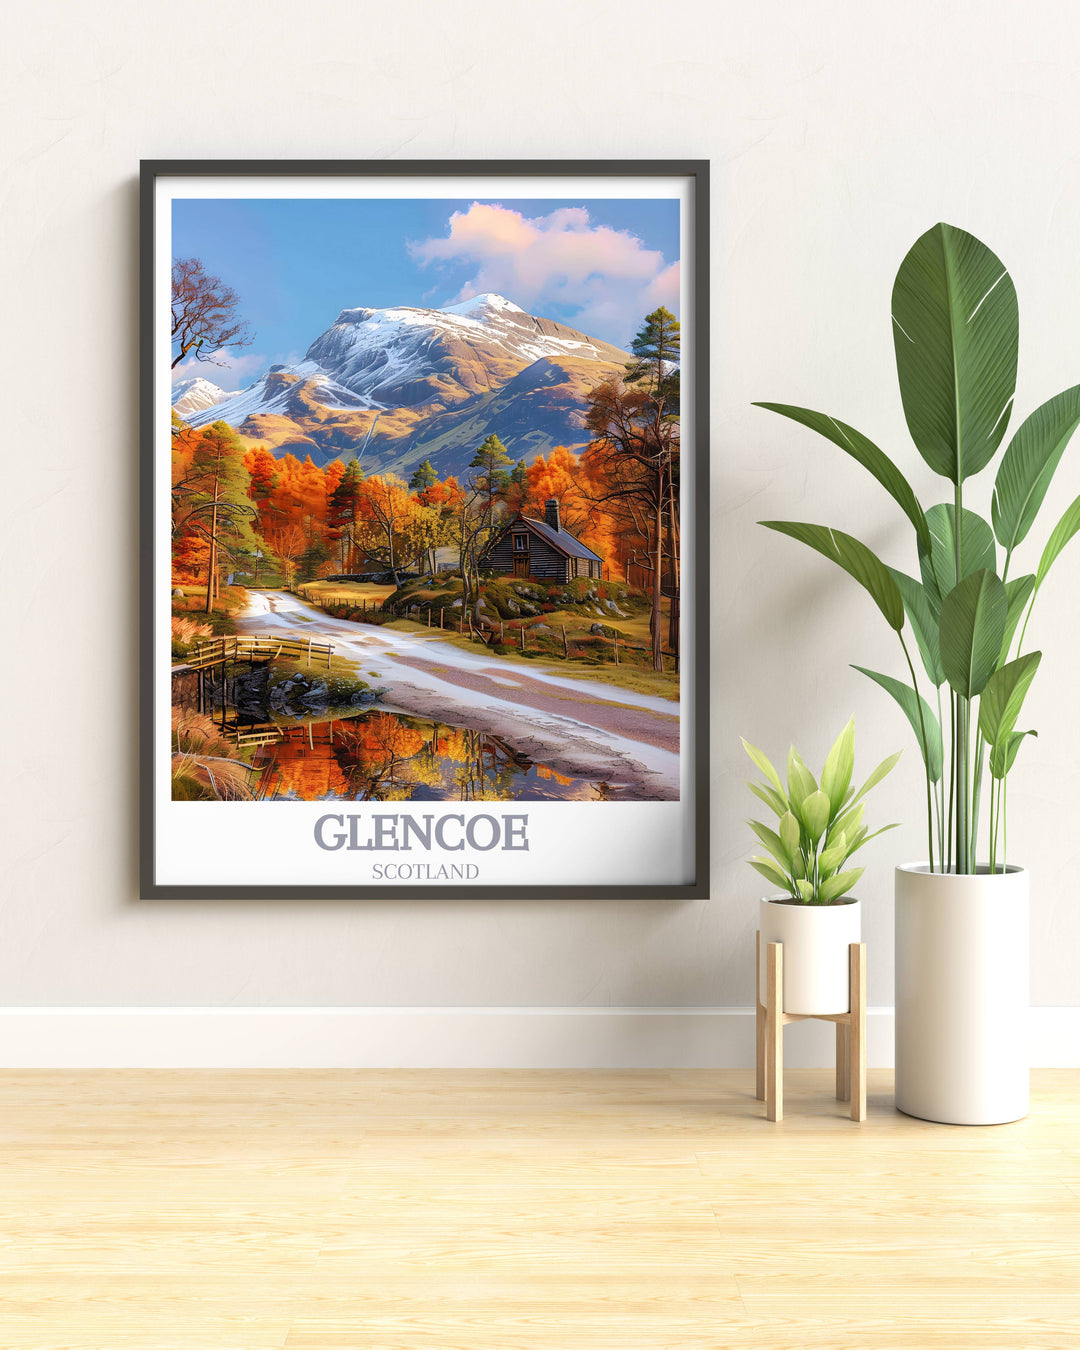 Glencoe Gift Art that celebrates the rich heritage and natural splendor of Scotland, ideal for anyone who cherishes this enchanting land.